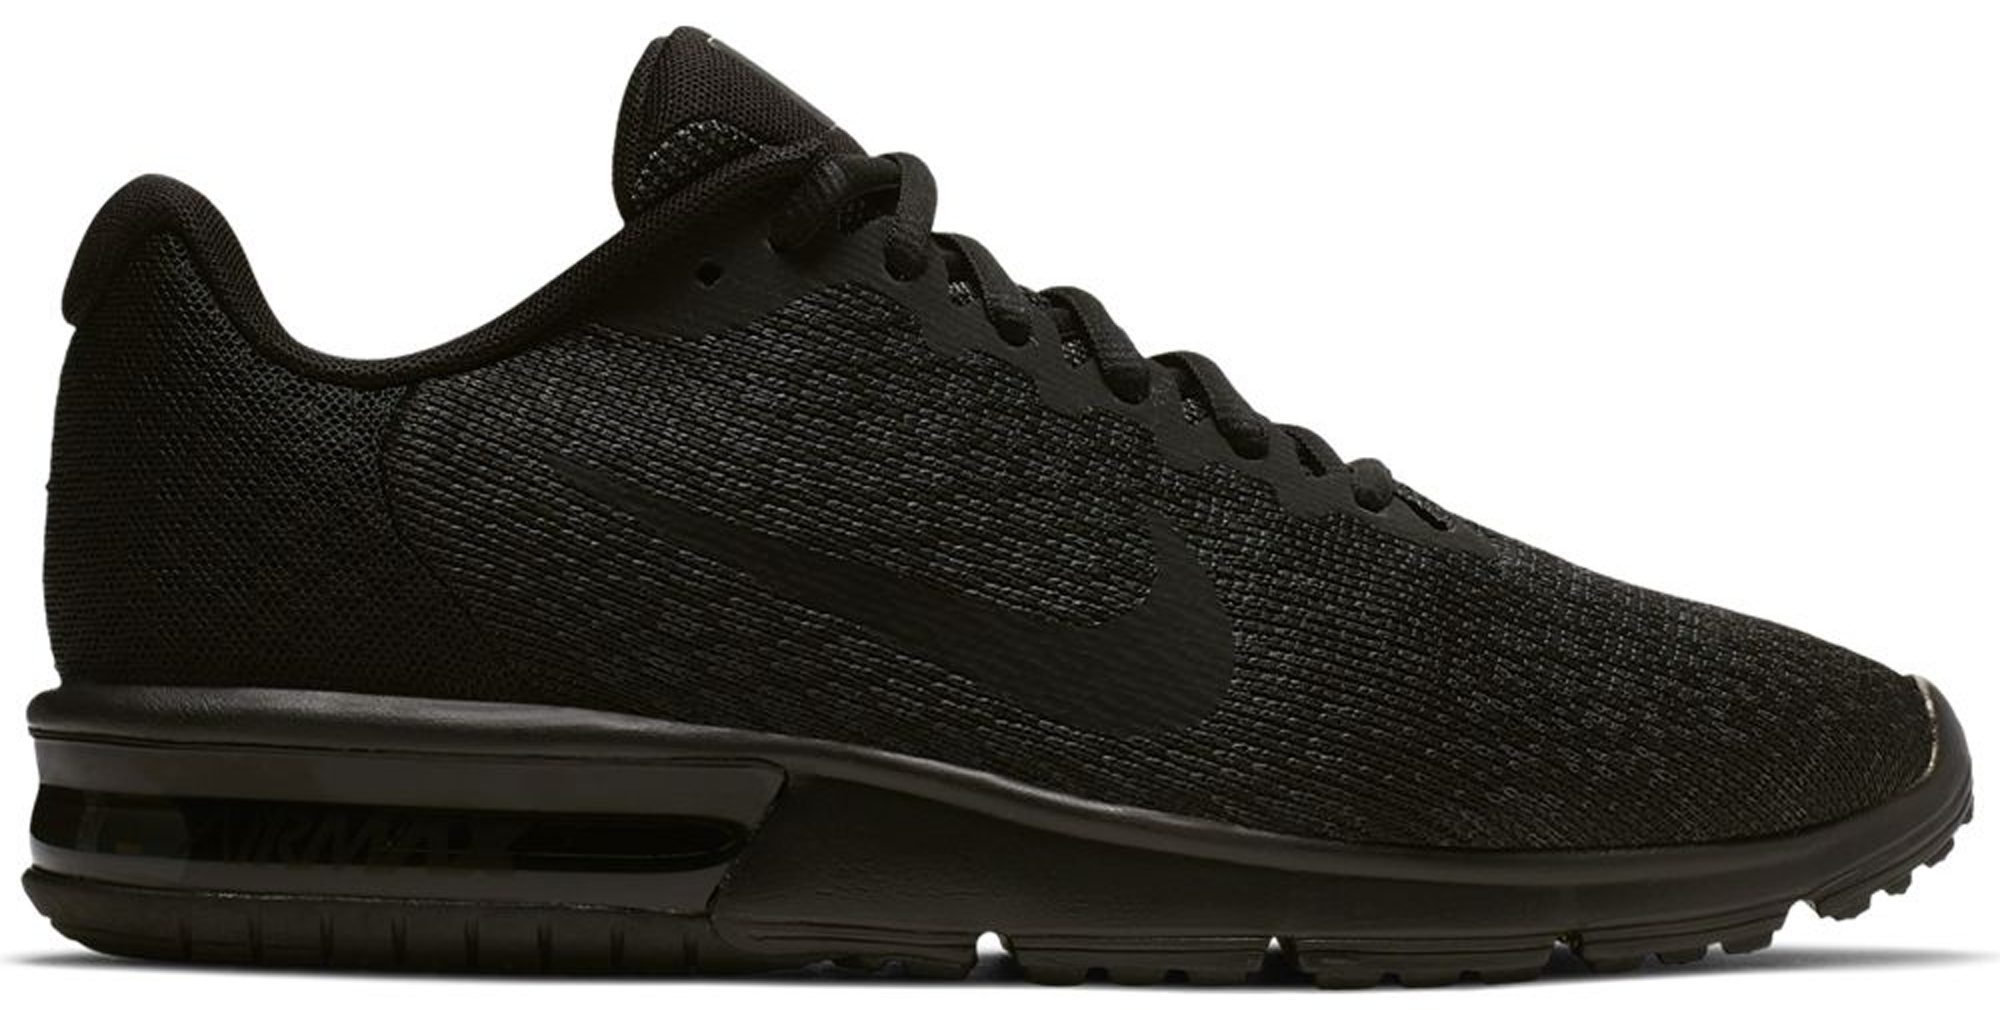 nike air max sequent 2 women's review